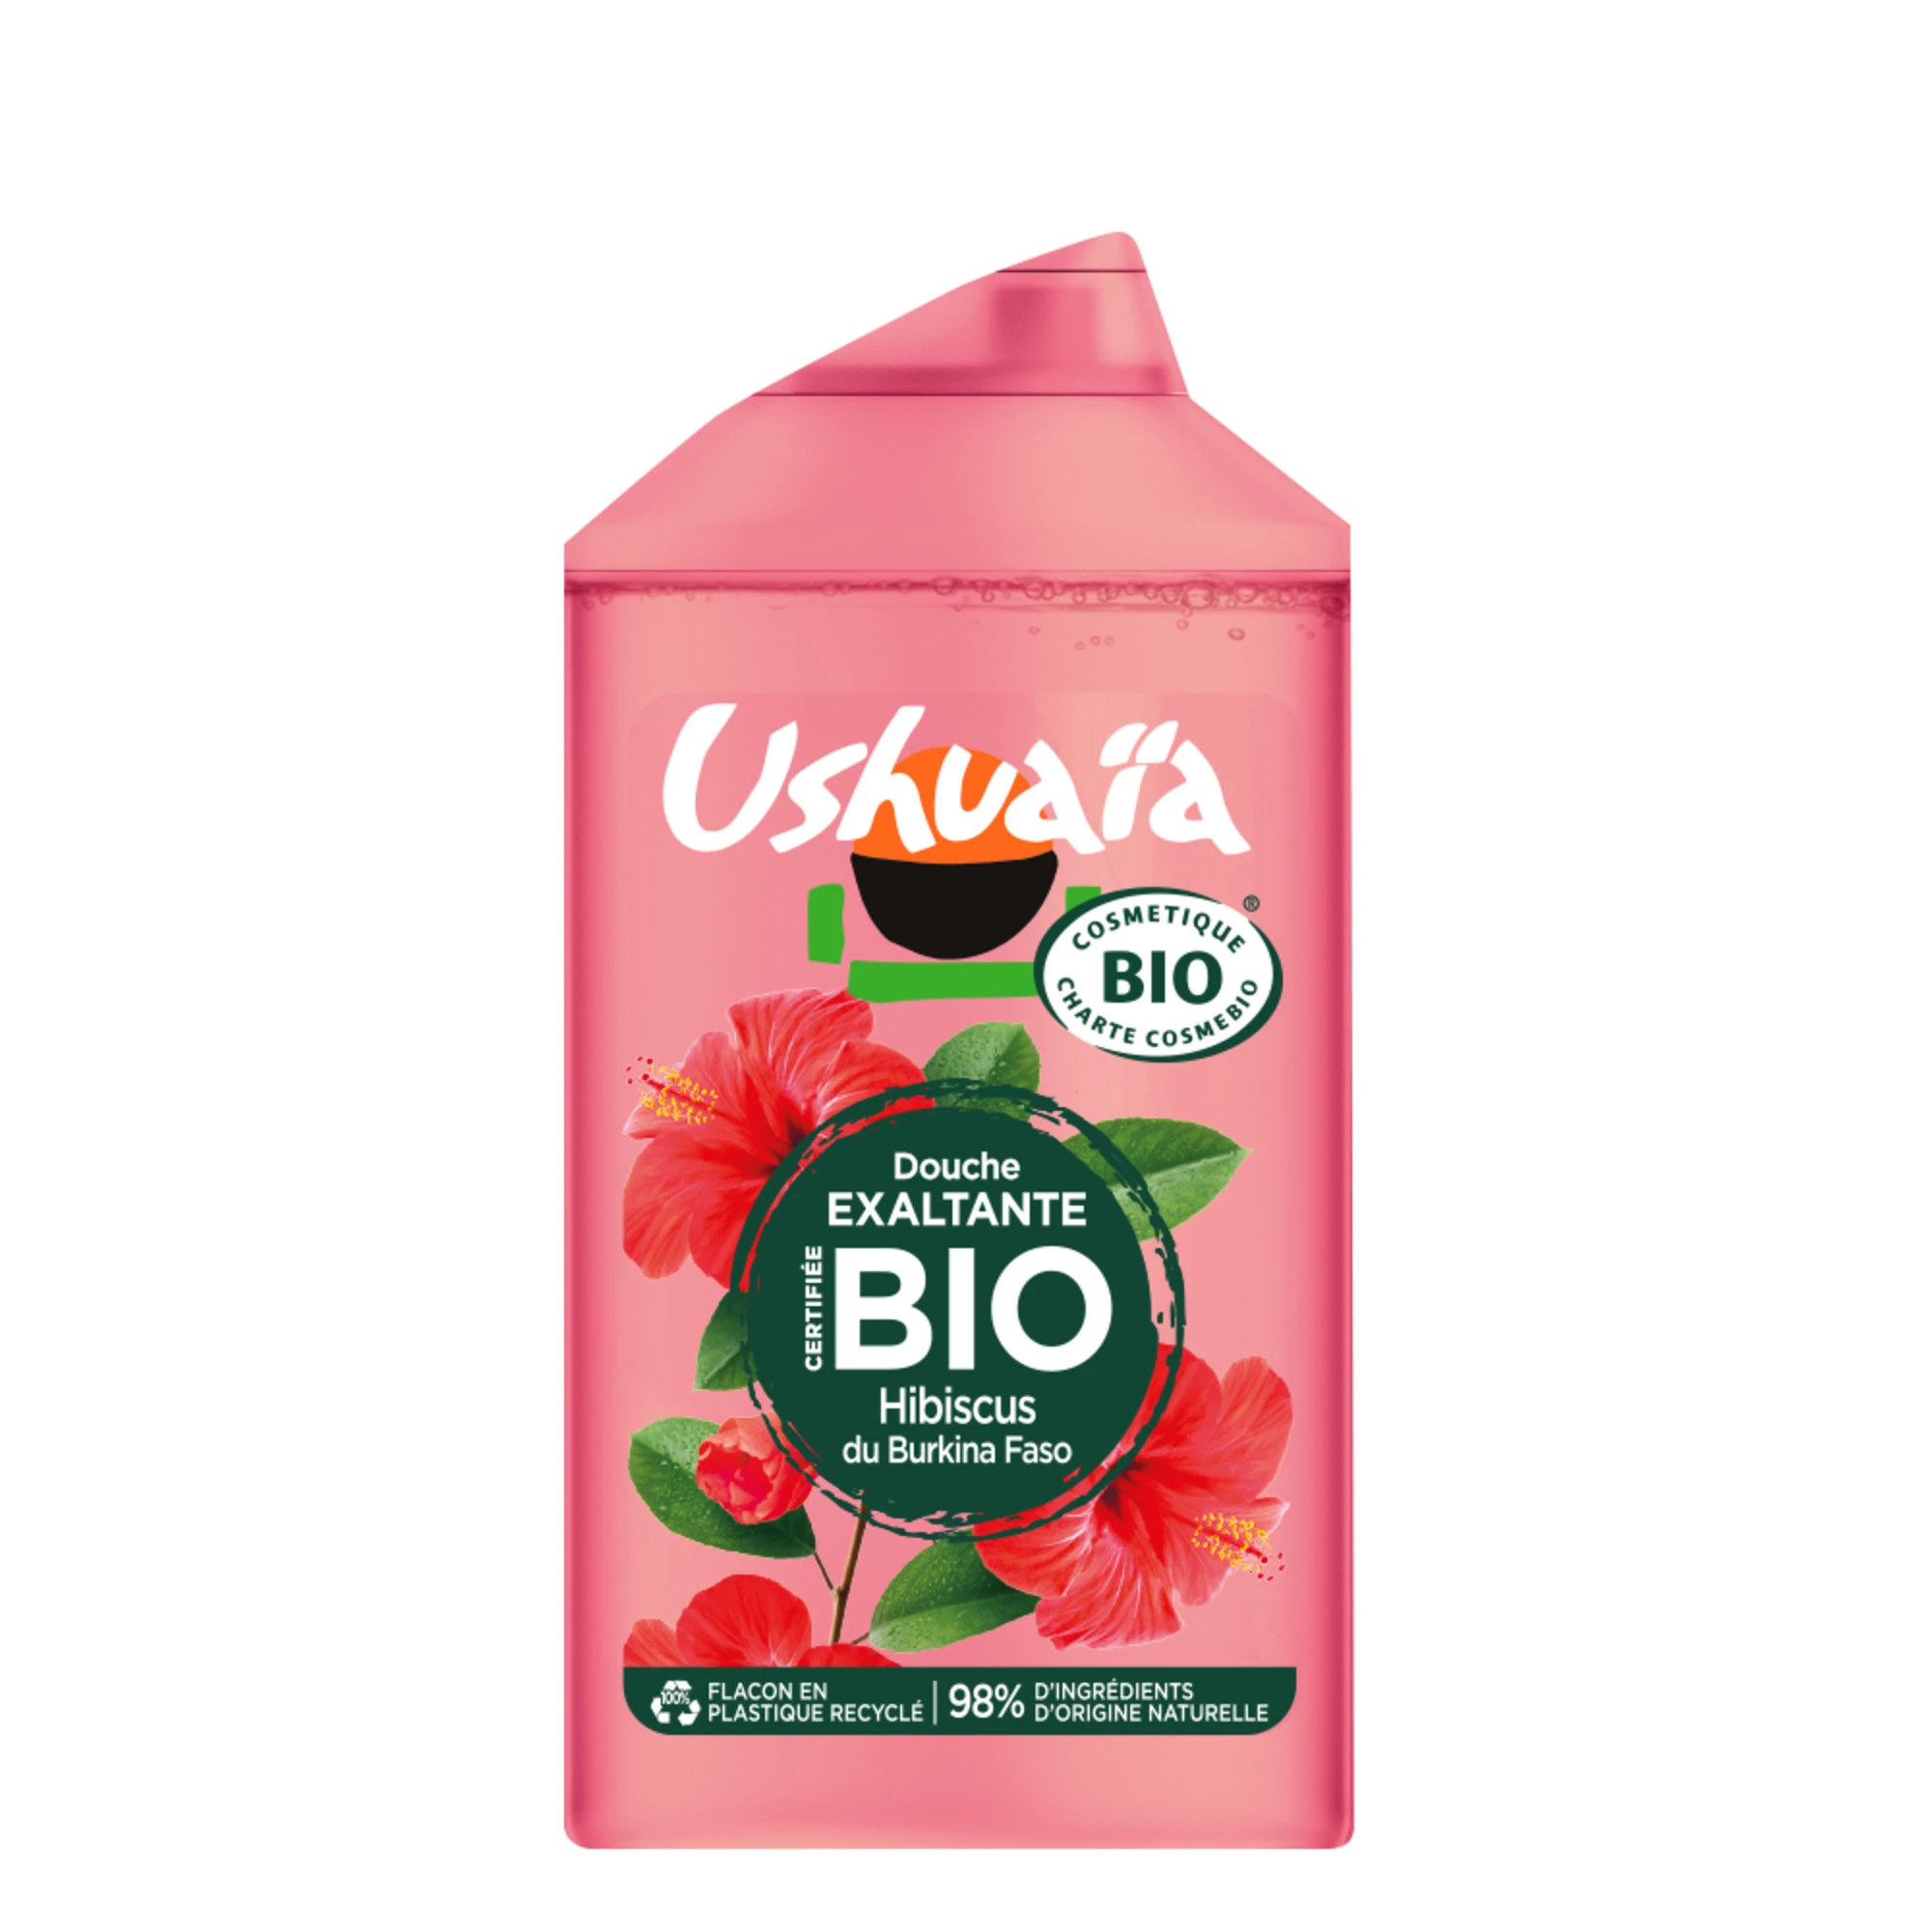 Ushu Cosmos Dche 250mlhibiscus